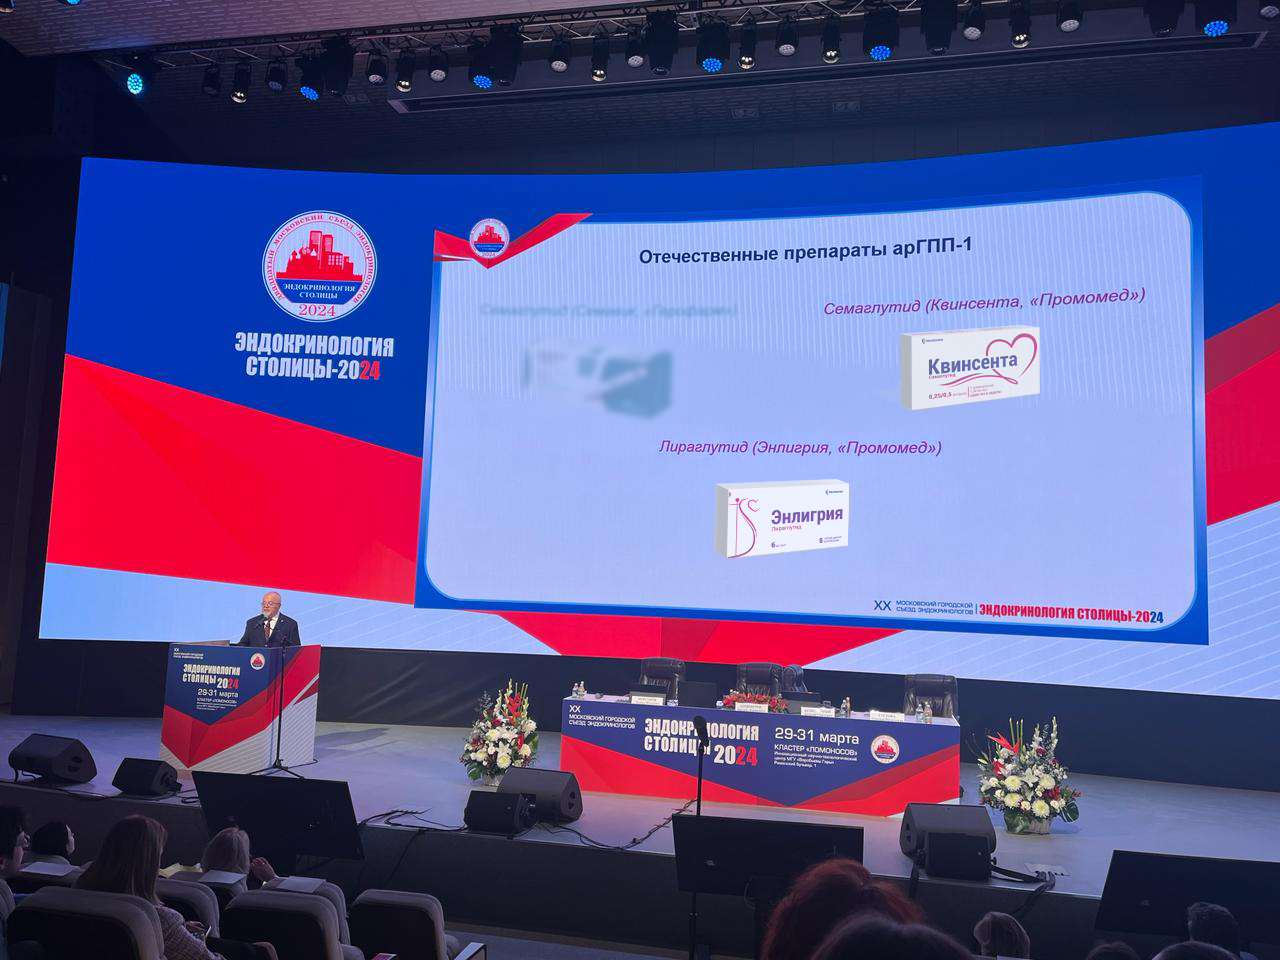 Promomed Group took part in the XX Moscow City Congress of Endocrinologists